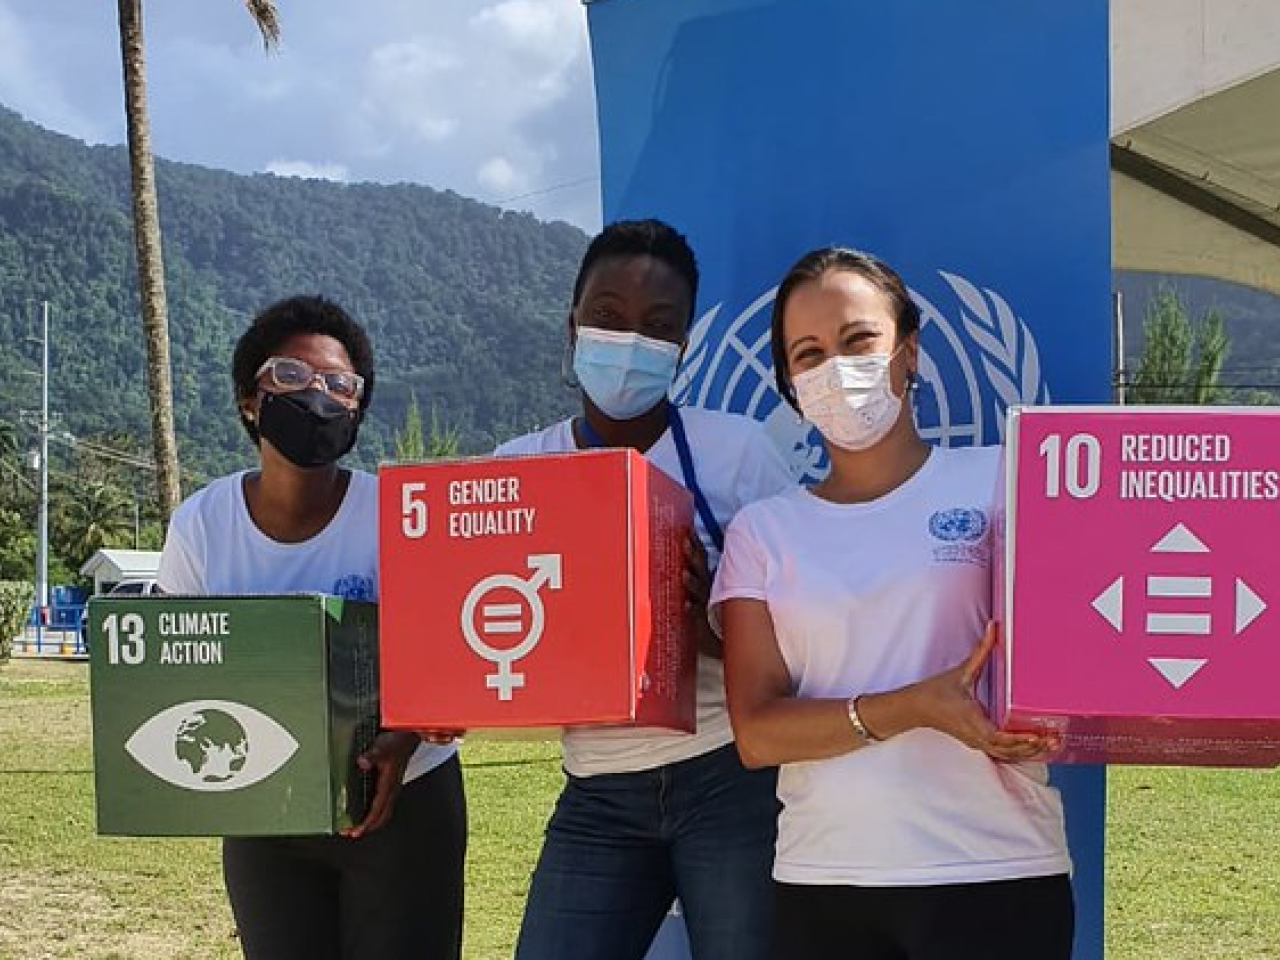 Three women hold cubes with different SDGs written on them